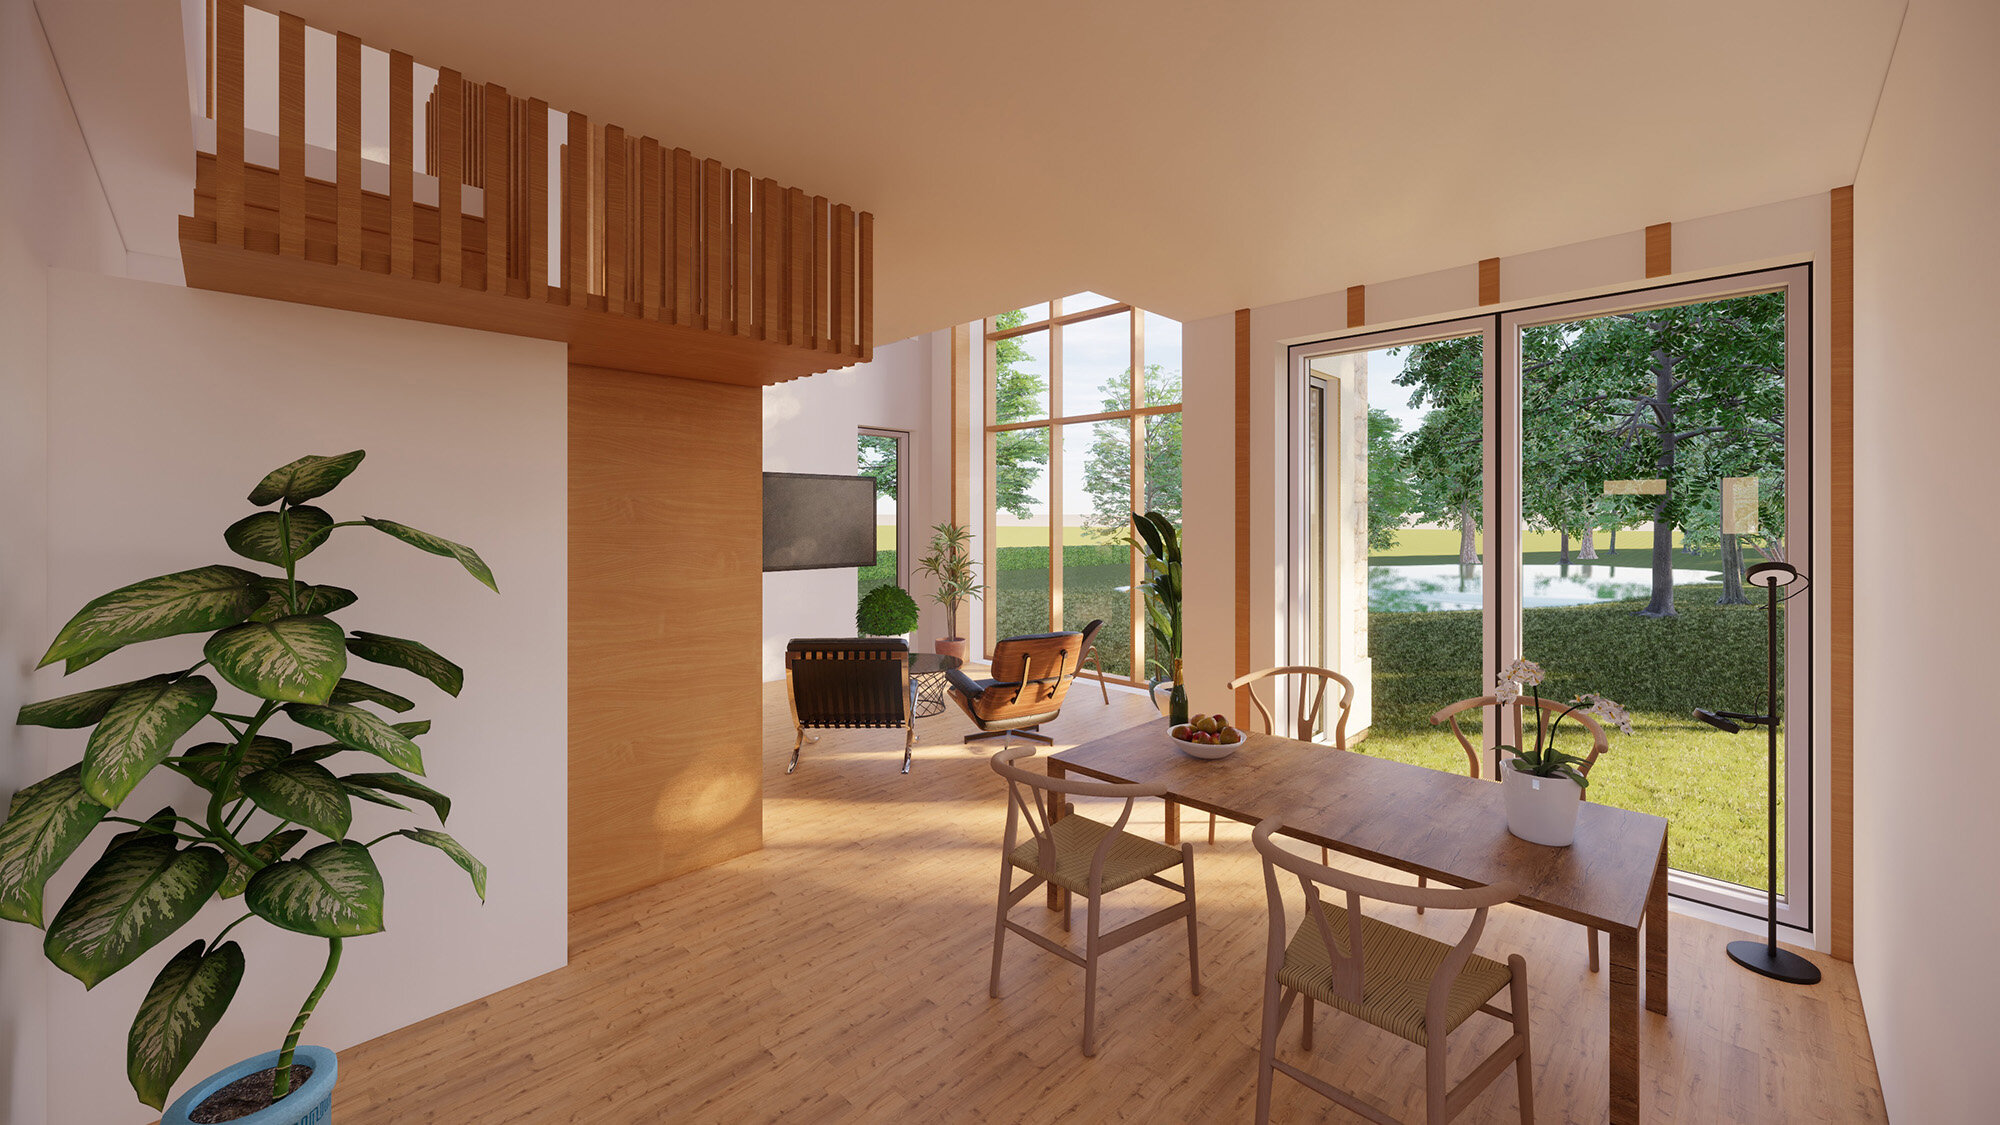 A timber frame eco-home in East Yorkshire